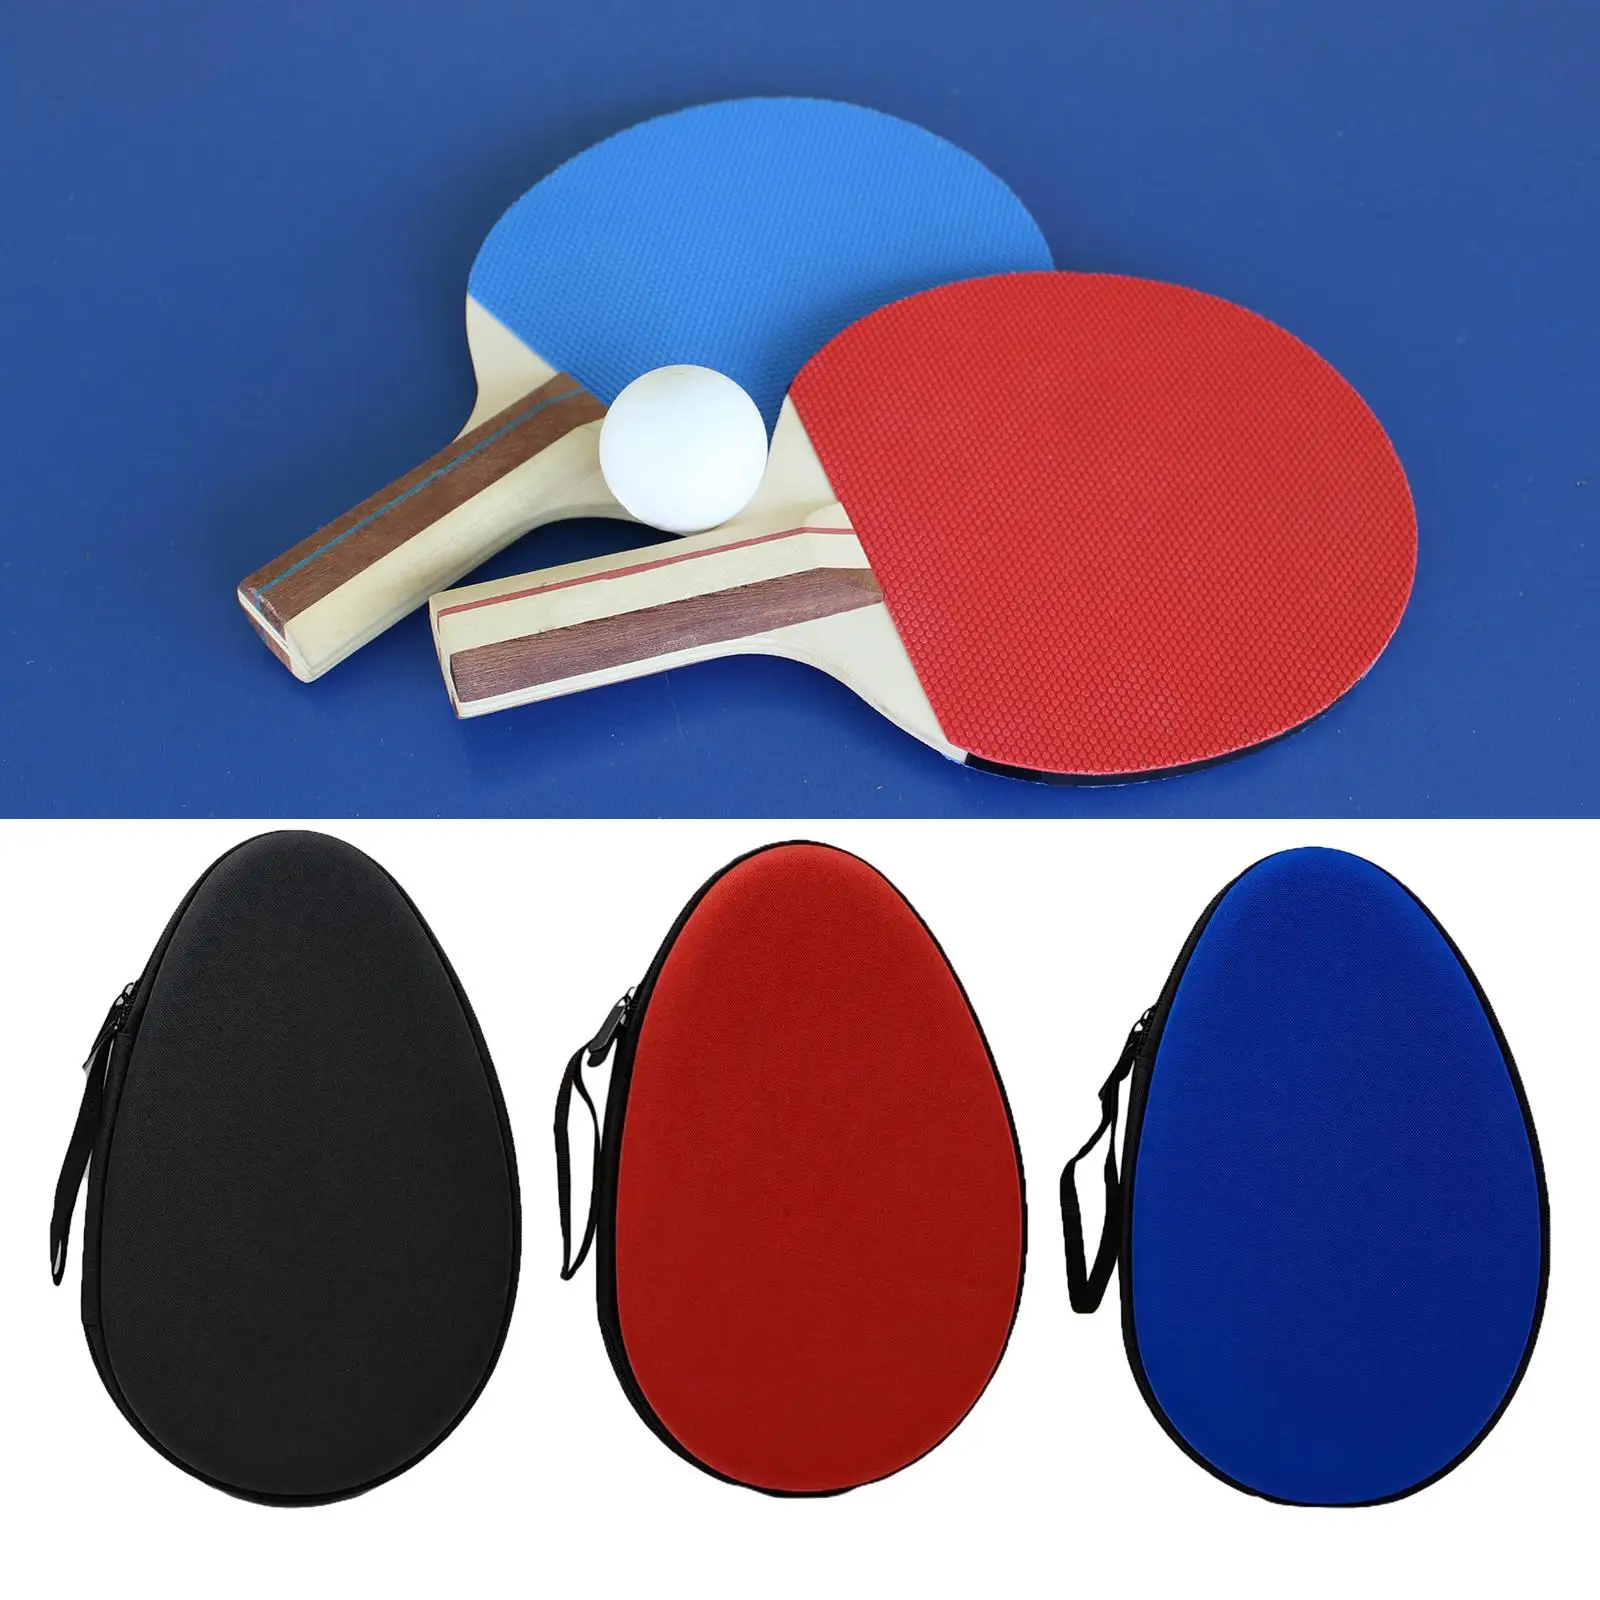 Portable Table Tennis Racket Case Storage Case Reusable Sturdy Wear Resistant Ping Pong Paddle Bag for Outdoor Training Indoor